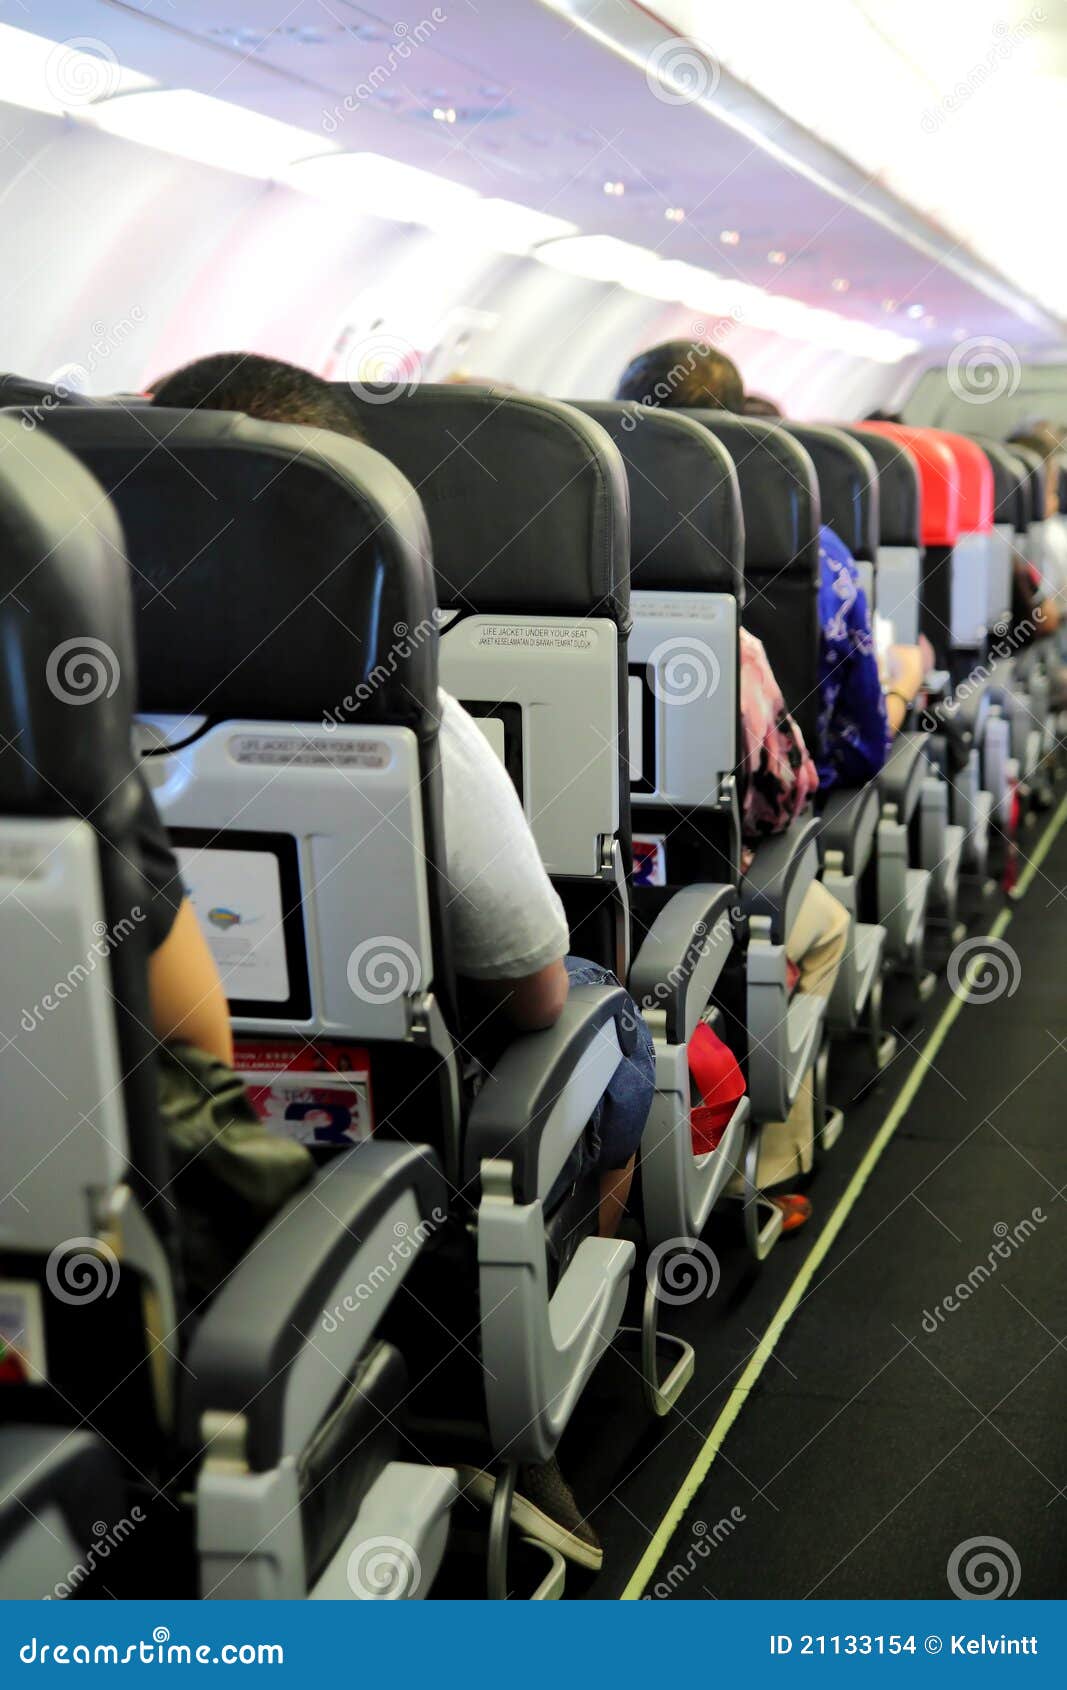 passengers in airplane cabin